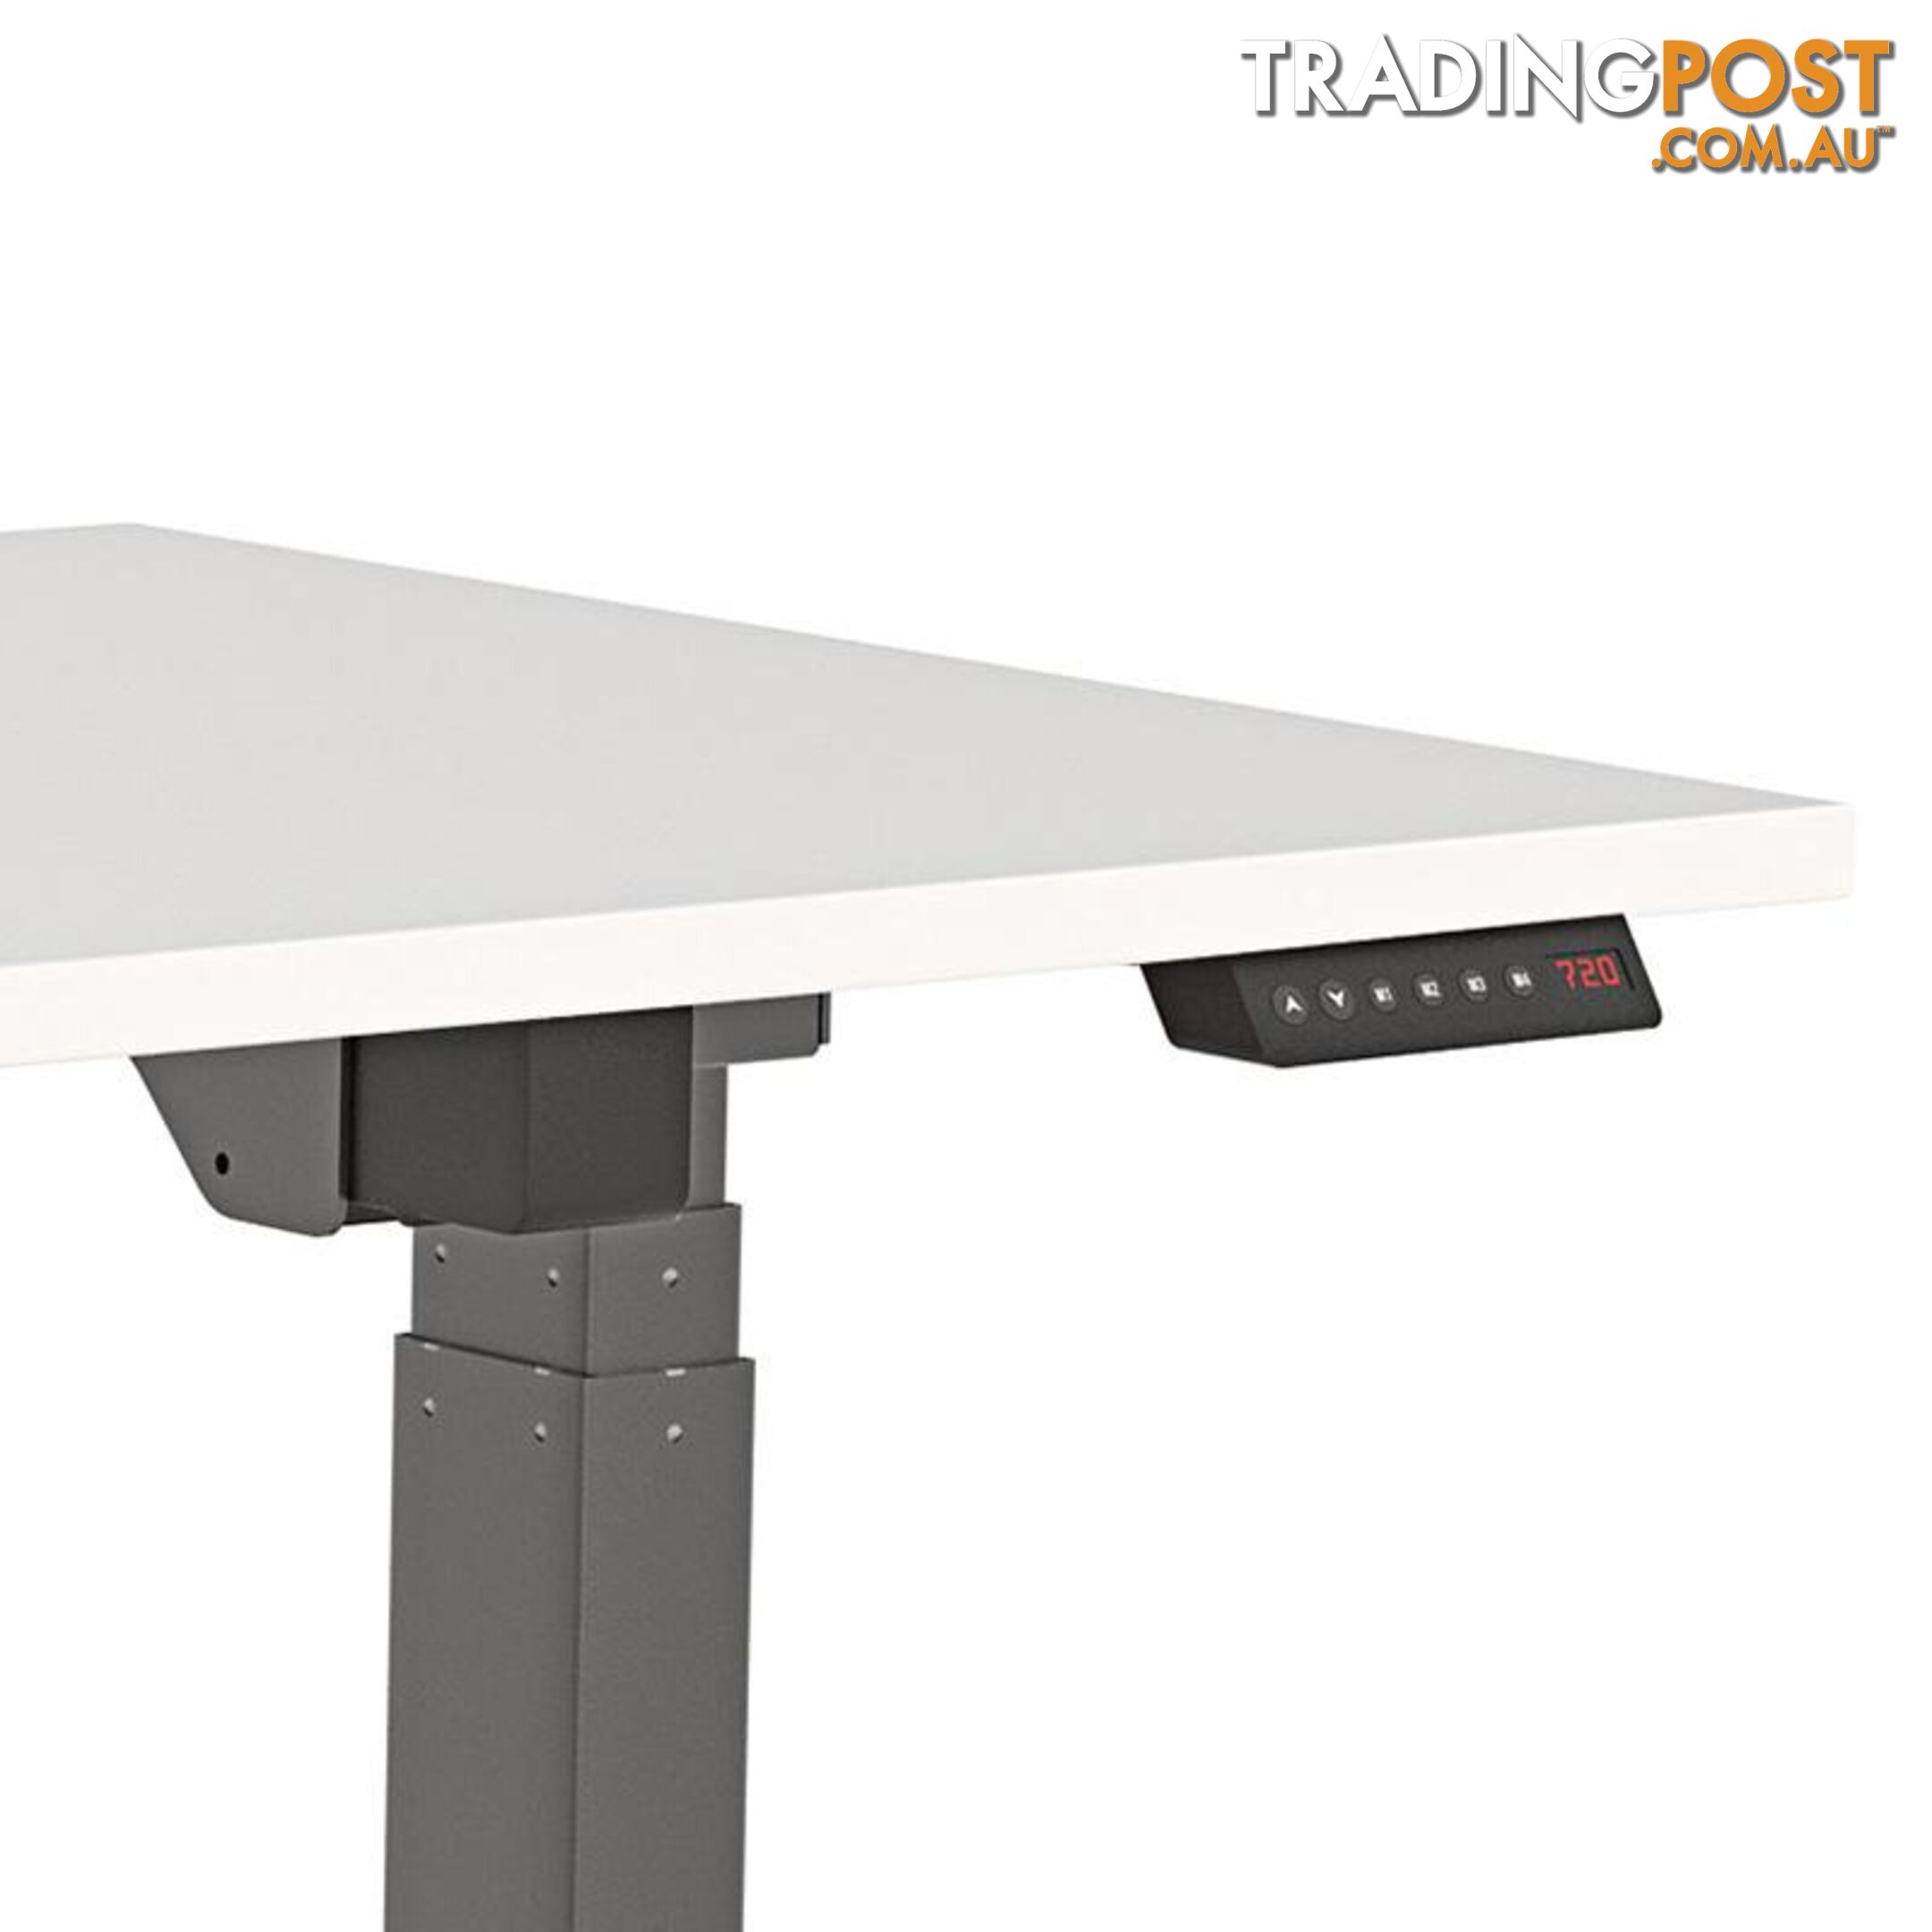 AGILE PRO Electric 2 Column Sit Standing Desk - 1200mm to 1800mm - White & White - OG_AGE2SSD131